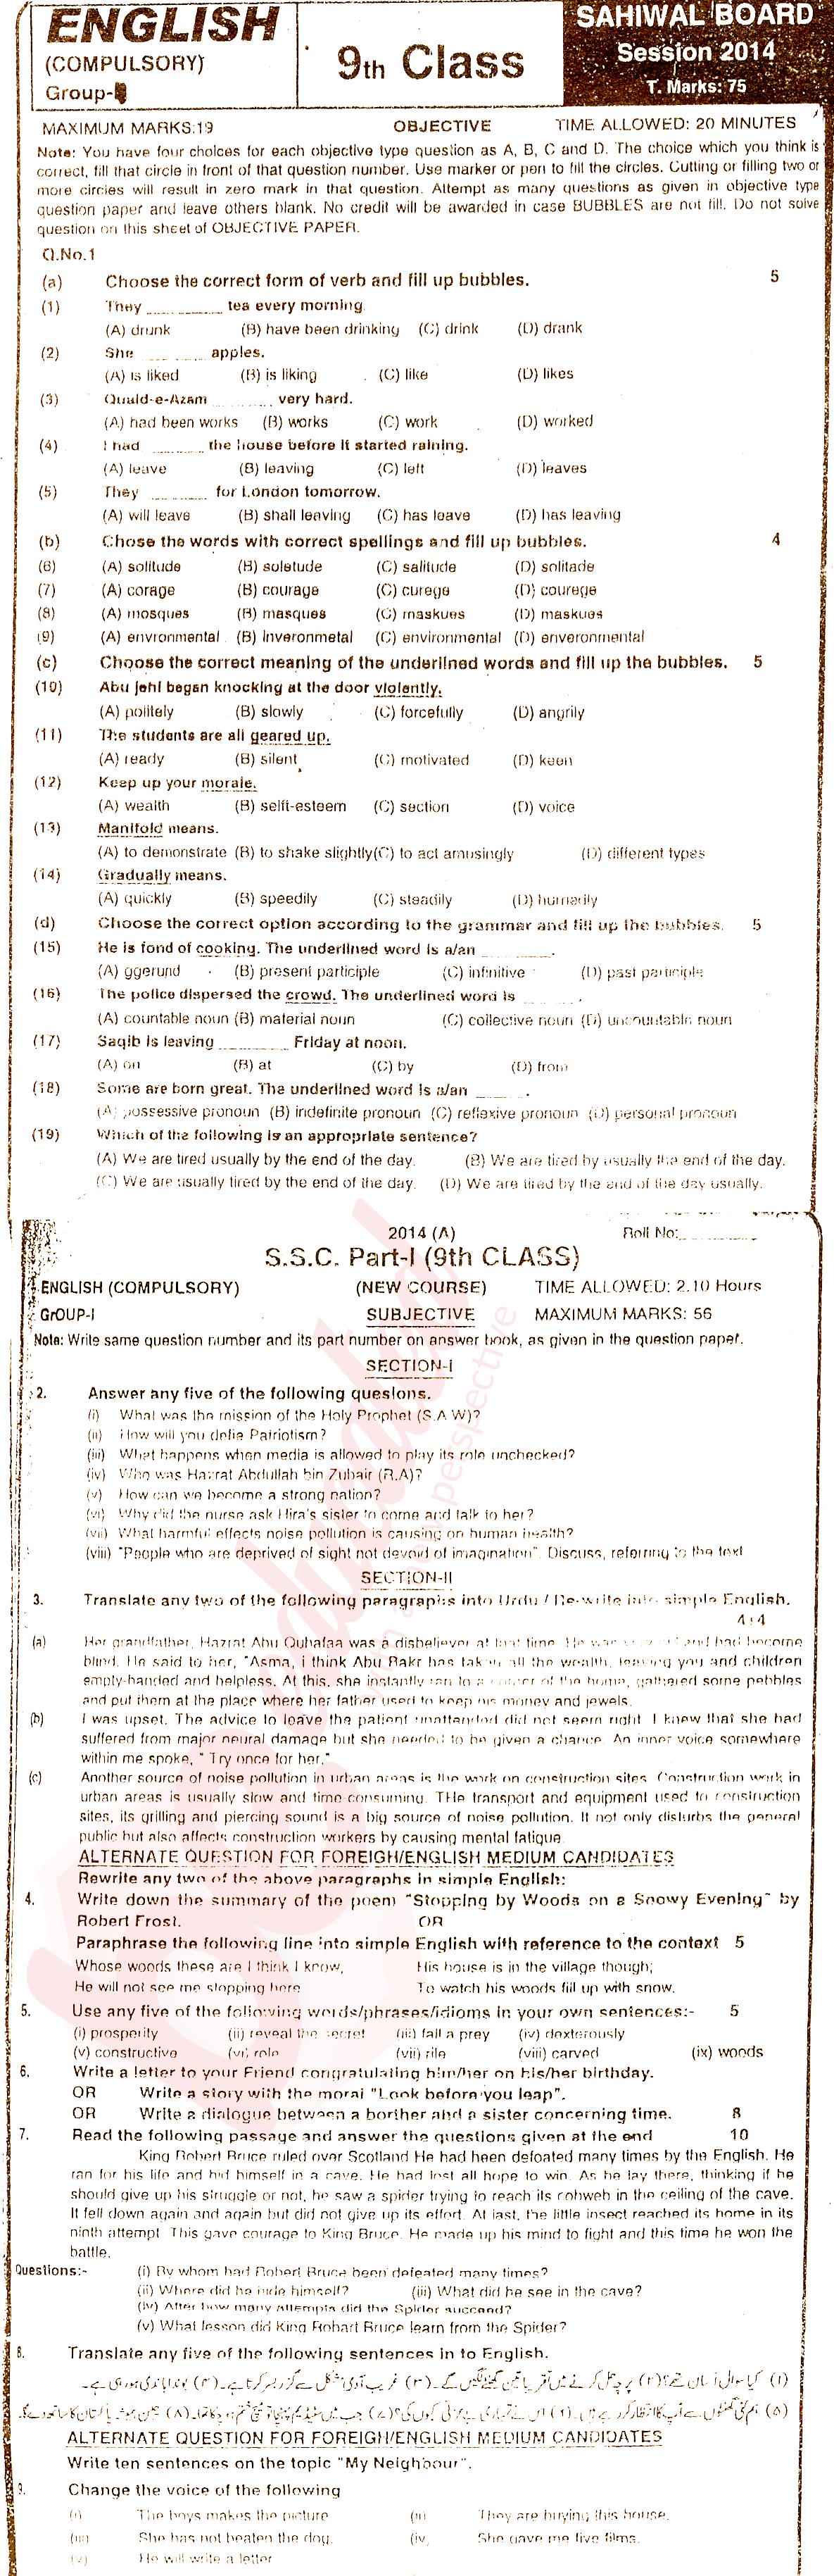 English 9th class Past Paper Group 1 BISE Sahiwal 2014